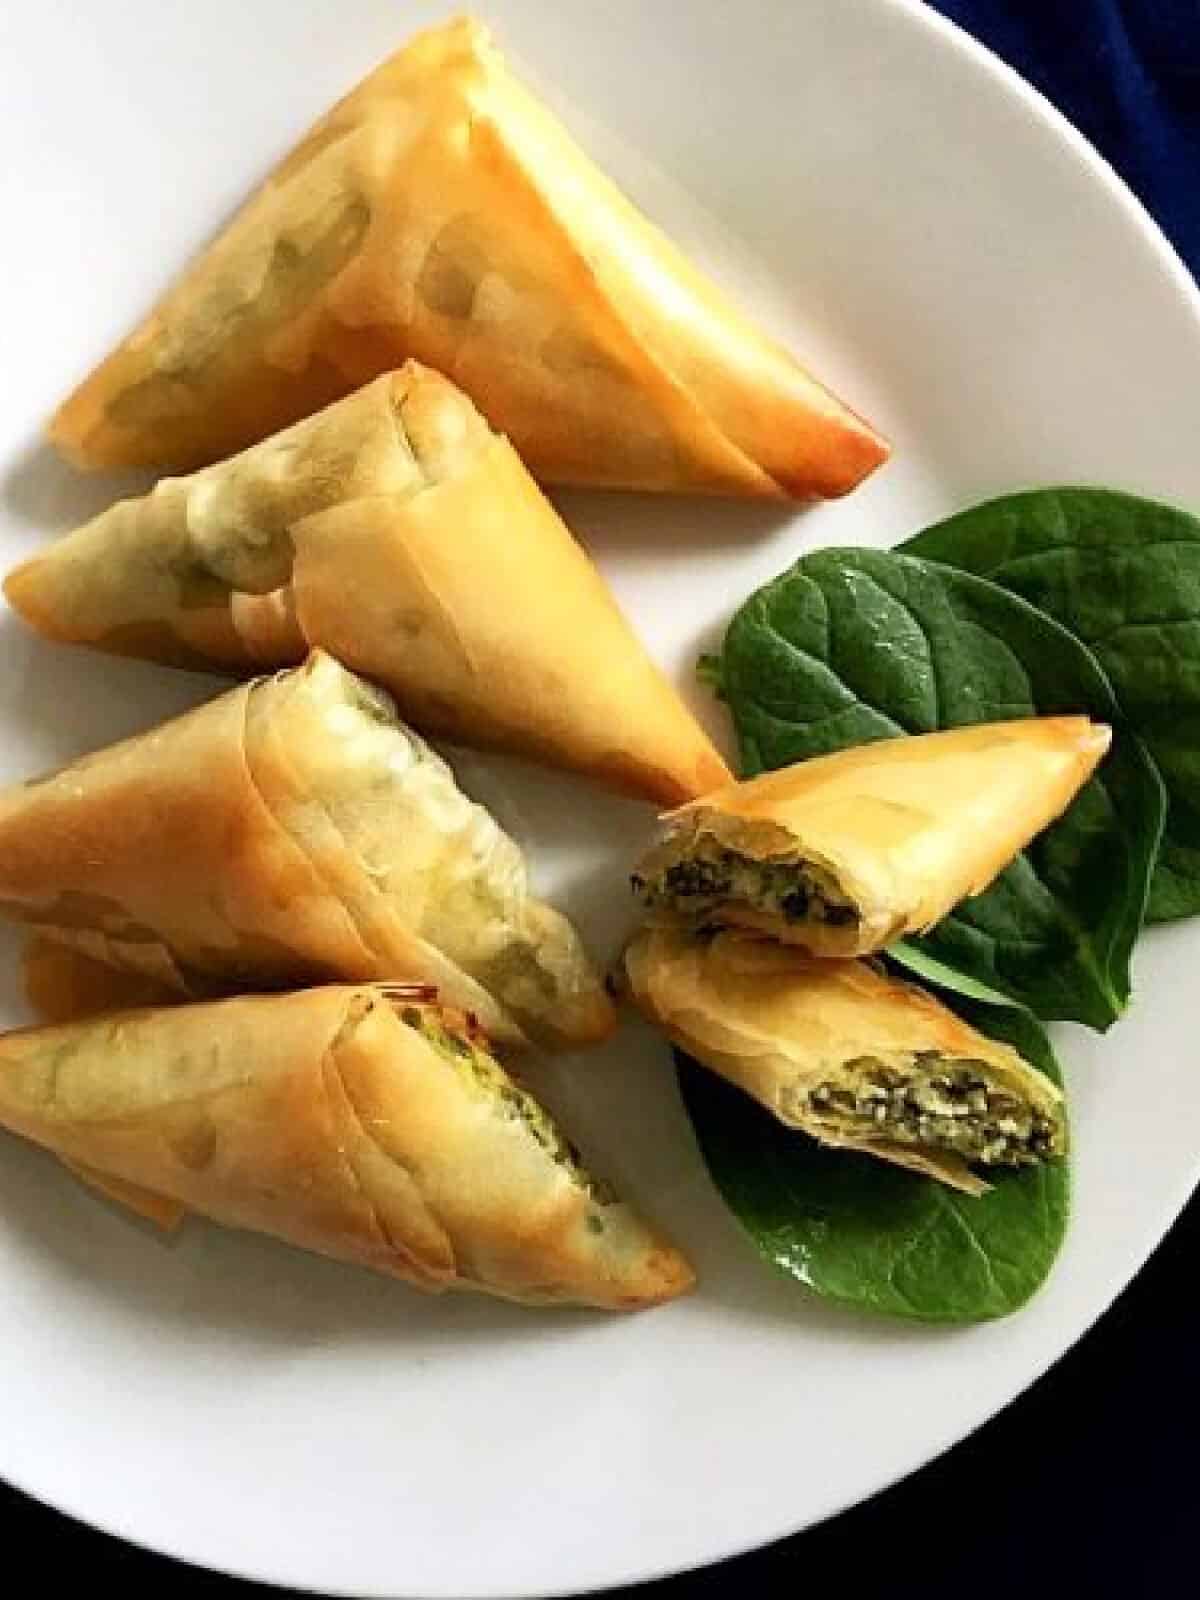 6 spanakopita triangles on a white plate with 3 spinach leaves.